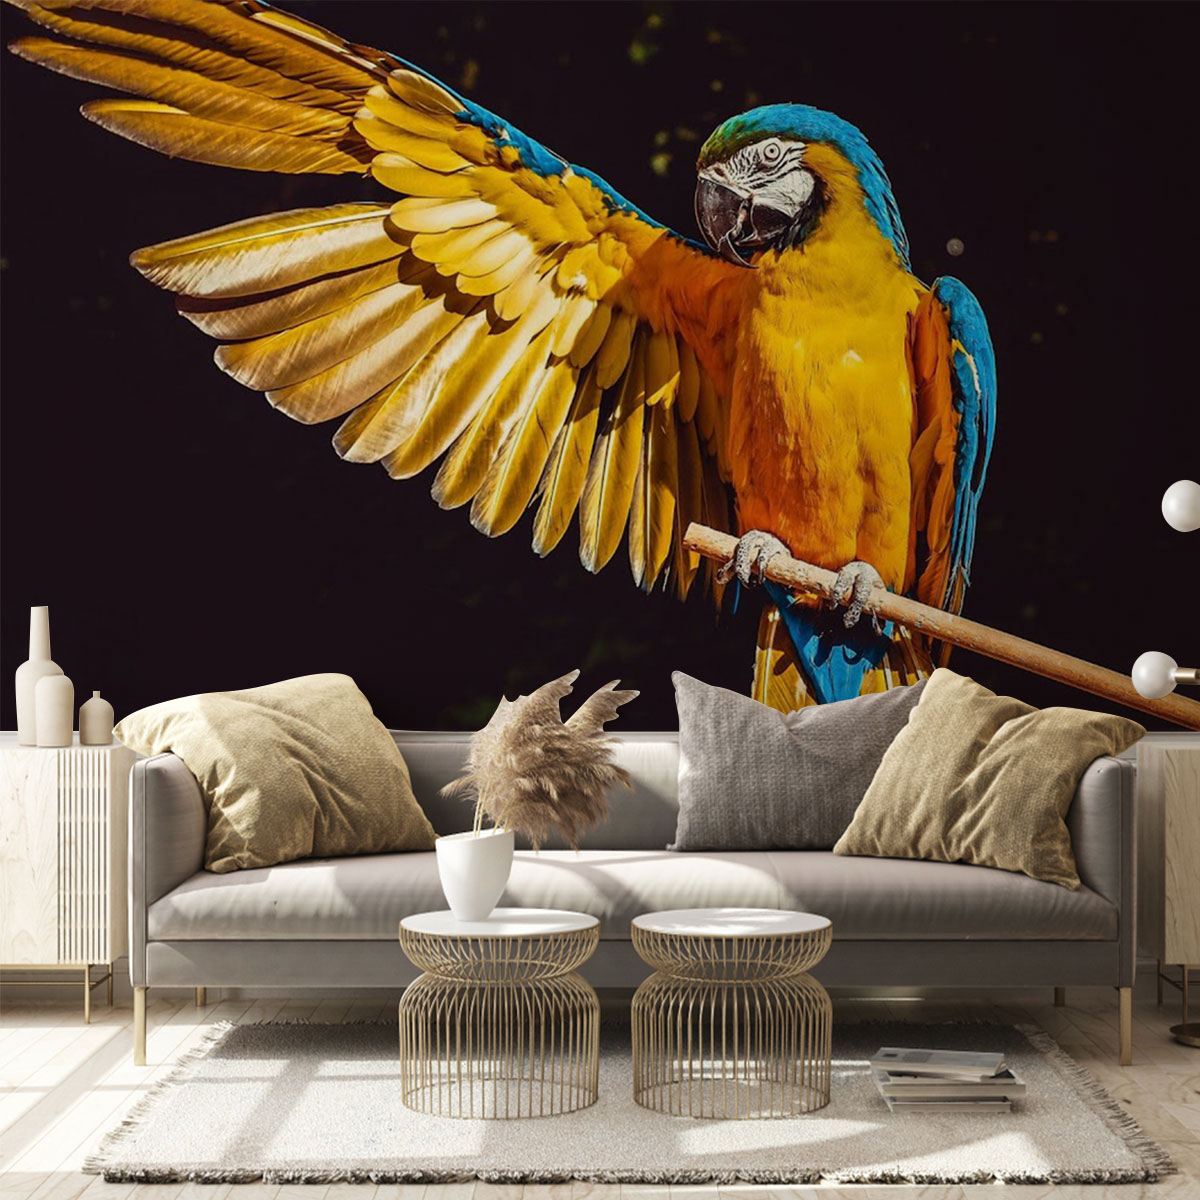 Black And Yellow Parrot Wall Mural